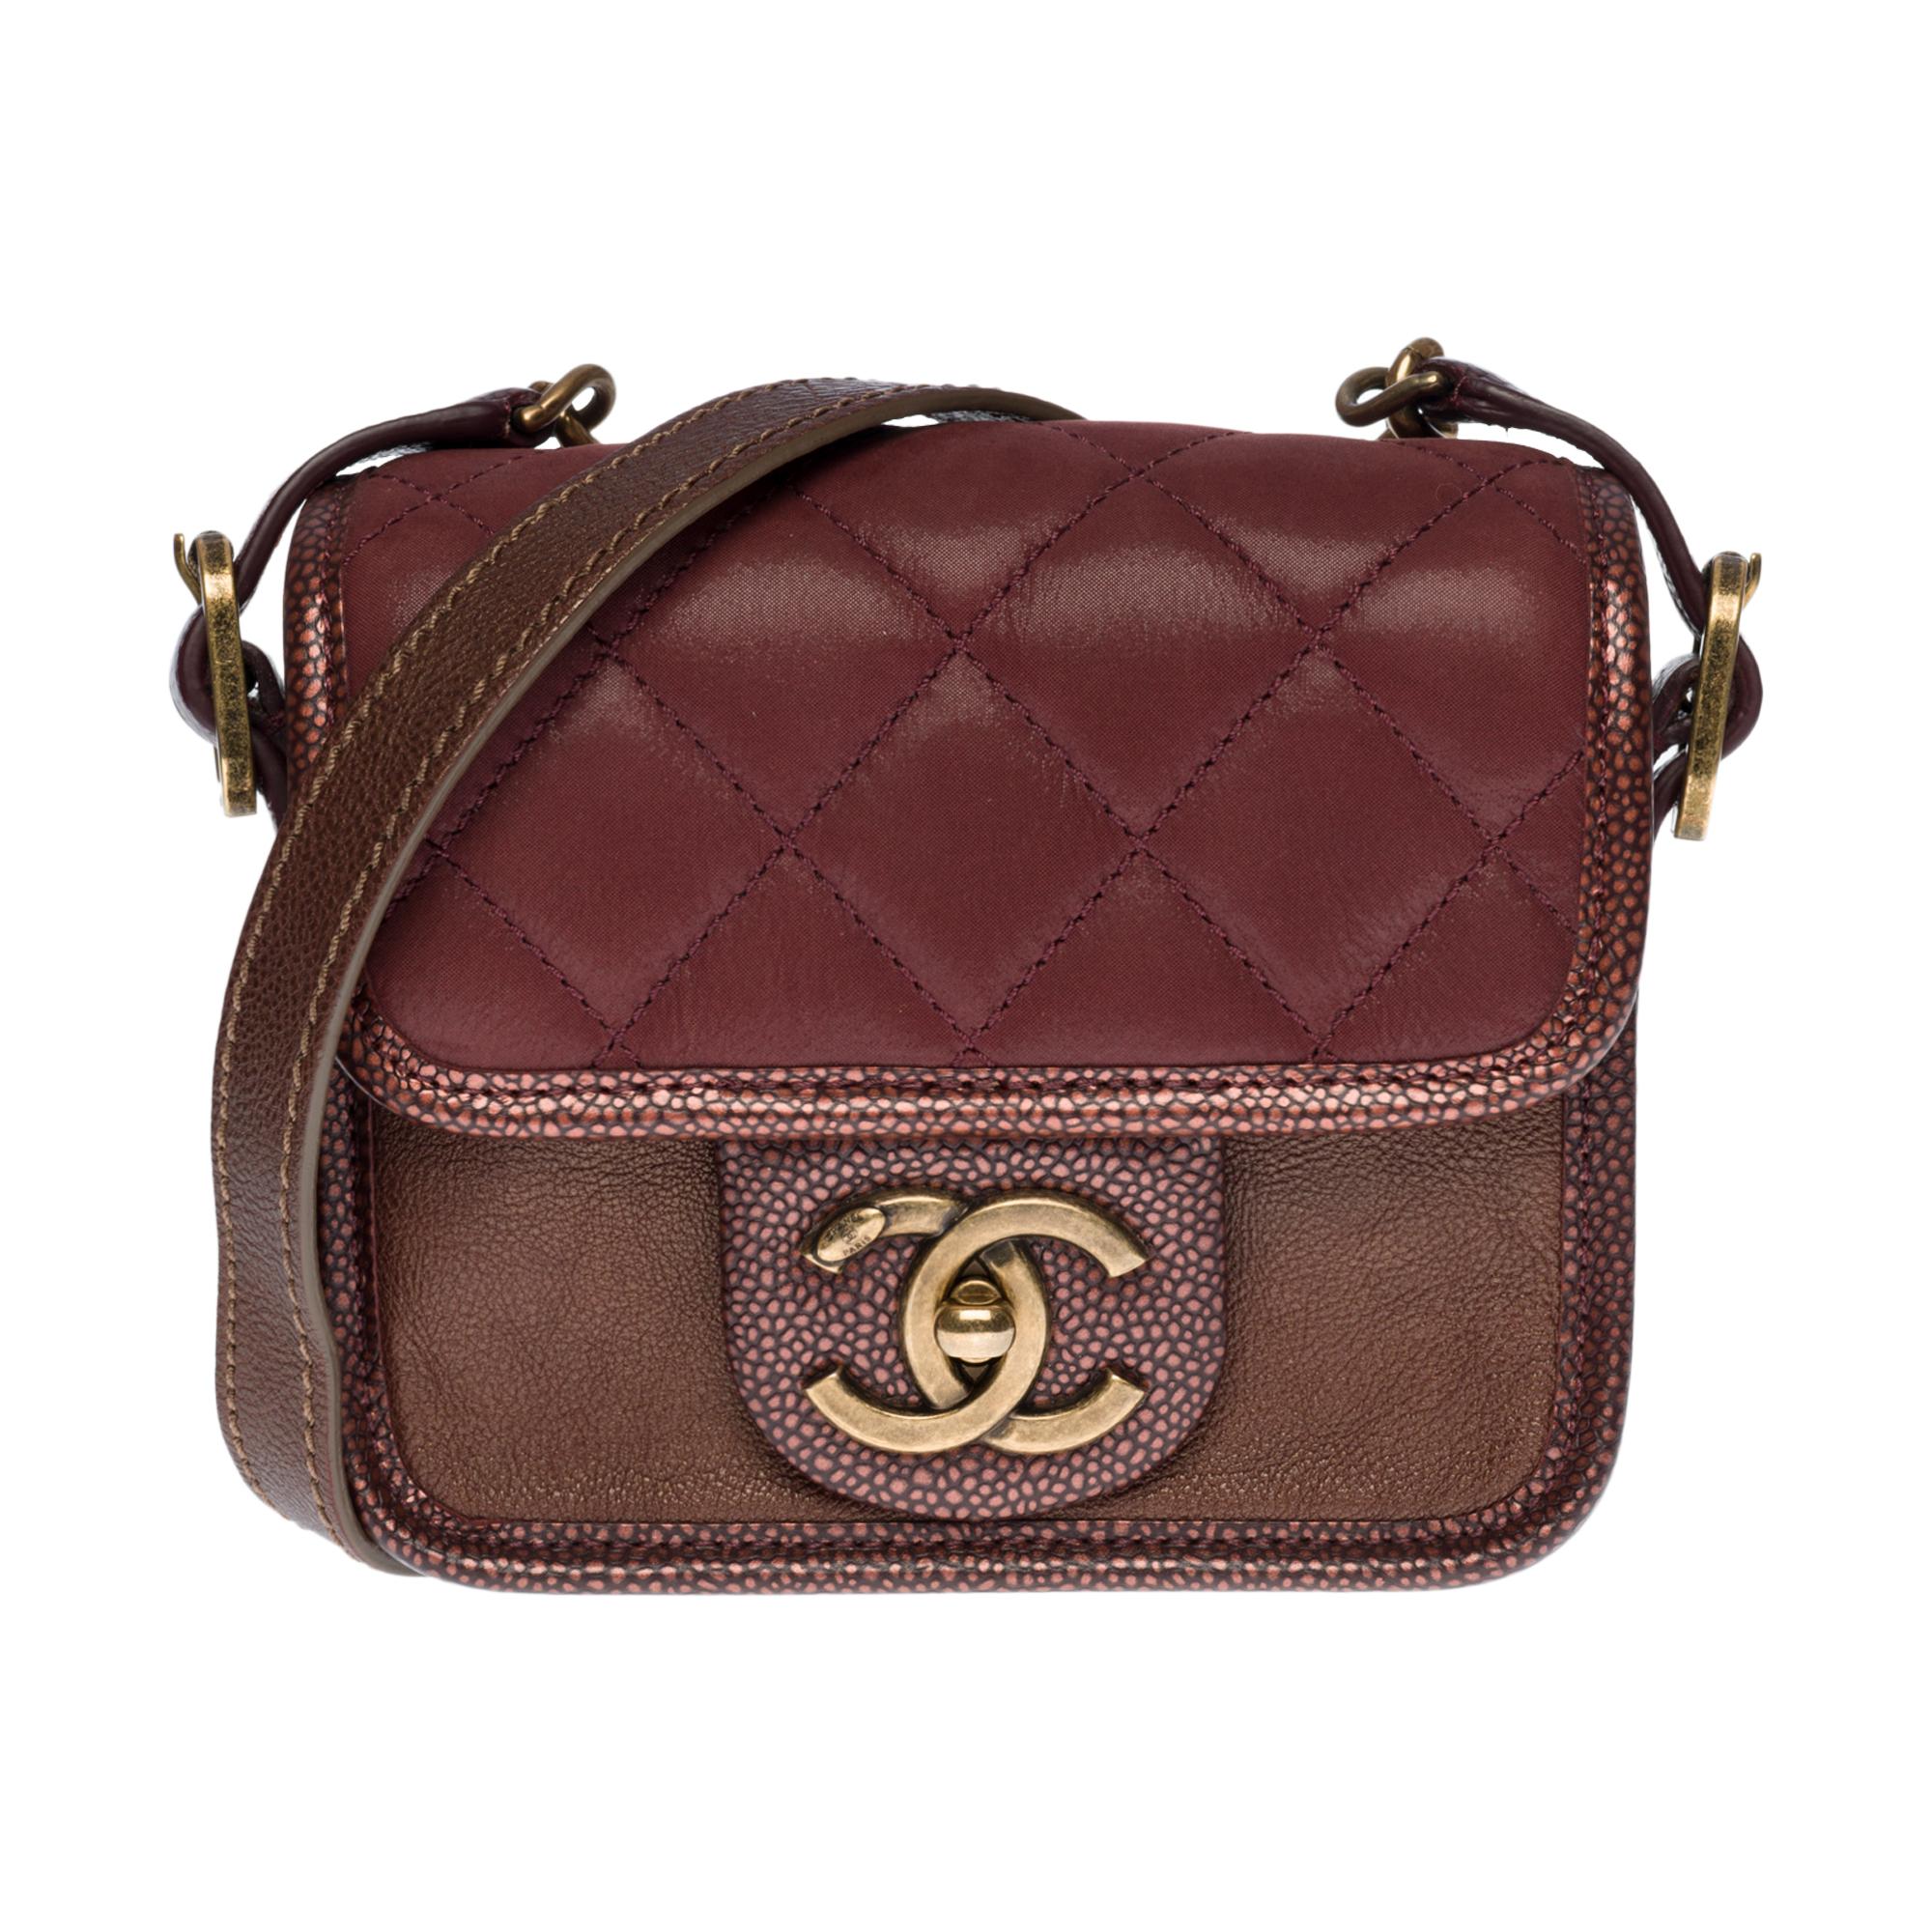 Amazing and rare Mini Chanel burgundy bag in partially quilted leather, antique gilded metal trim , a metal handle & leather allowing a shoulder carry
Back patch pocket in bronze leather
Closure by flap with CC logo in aged gilded metal
Lining in